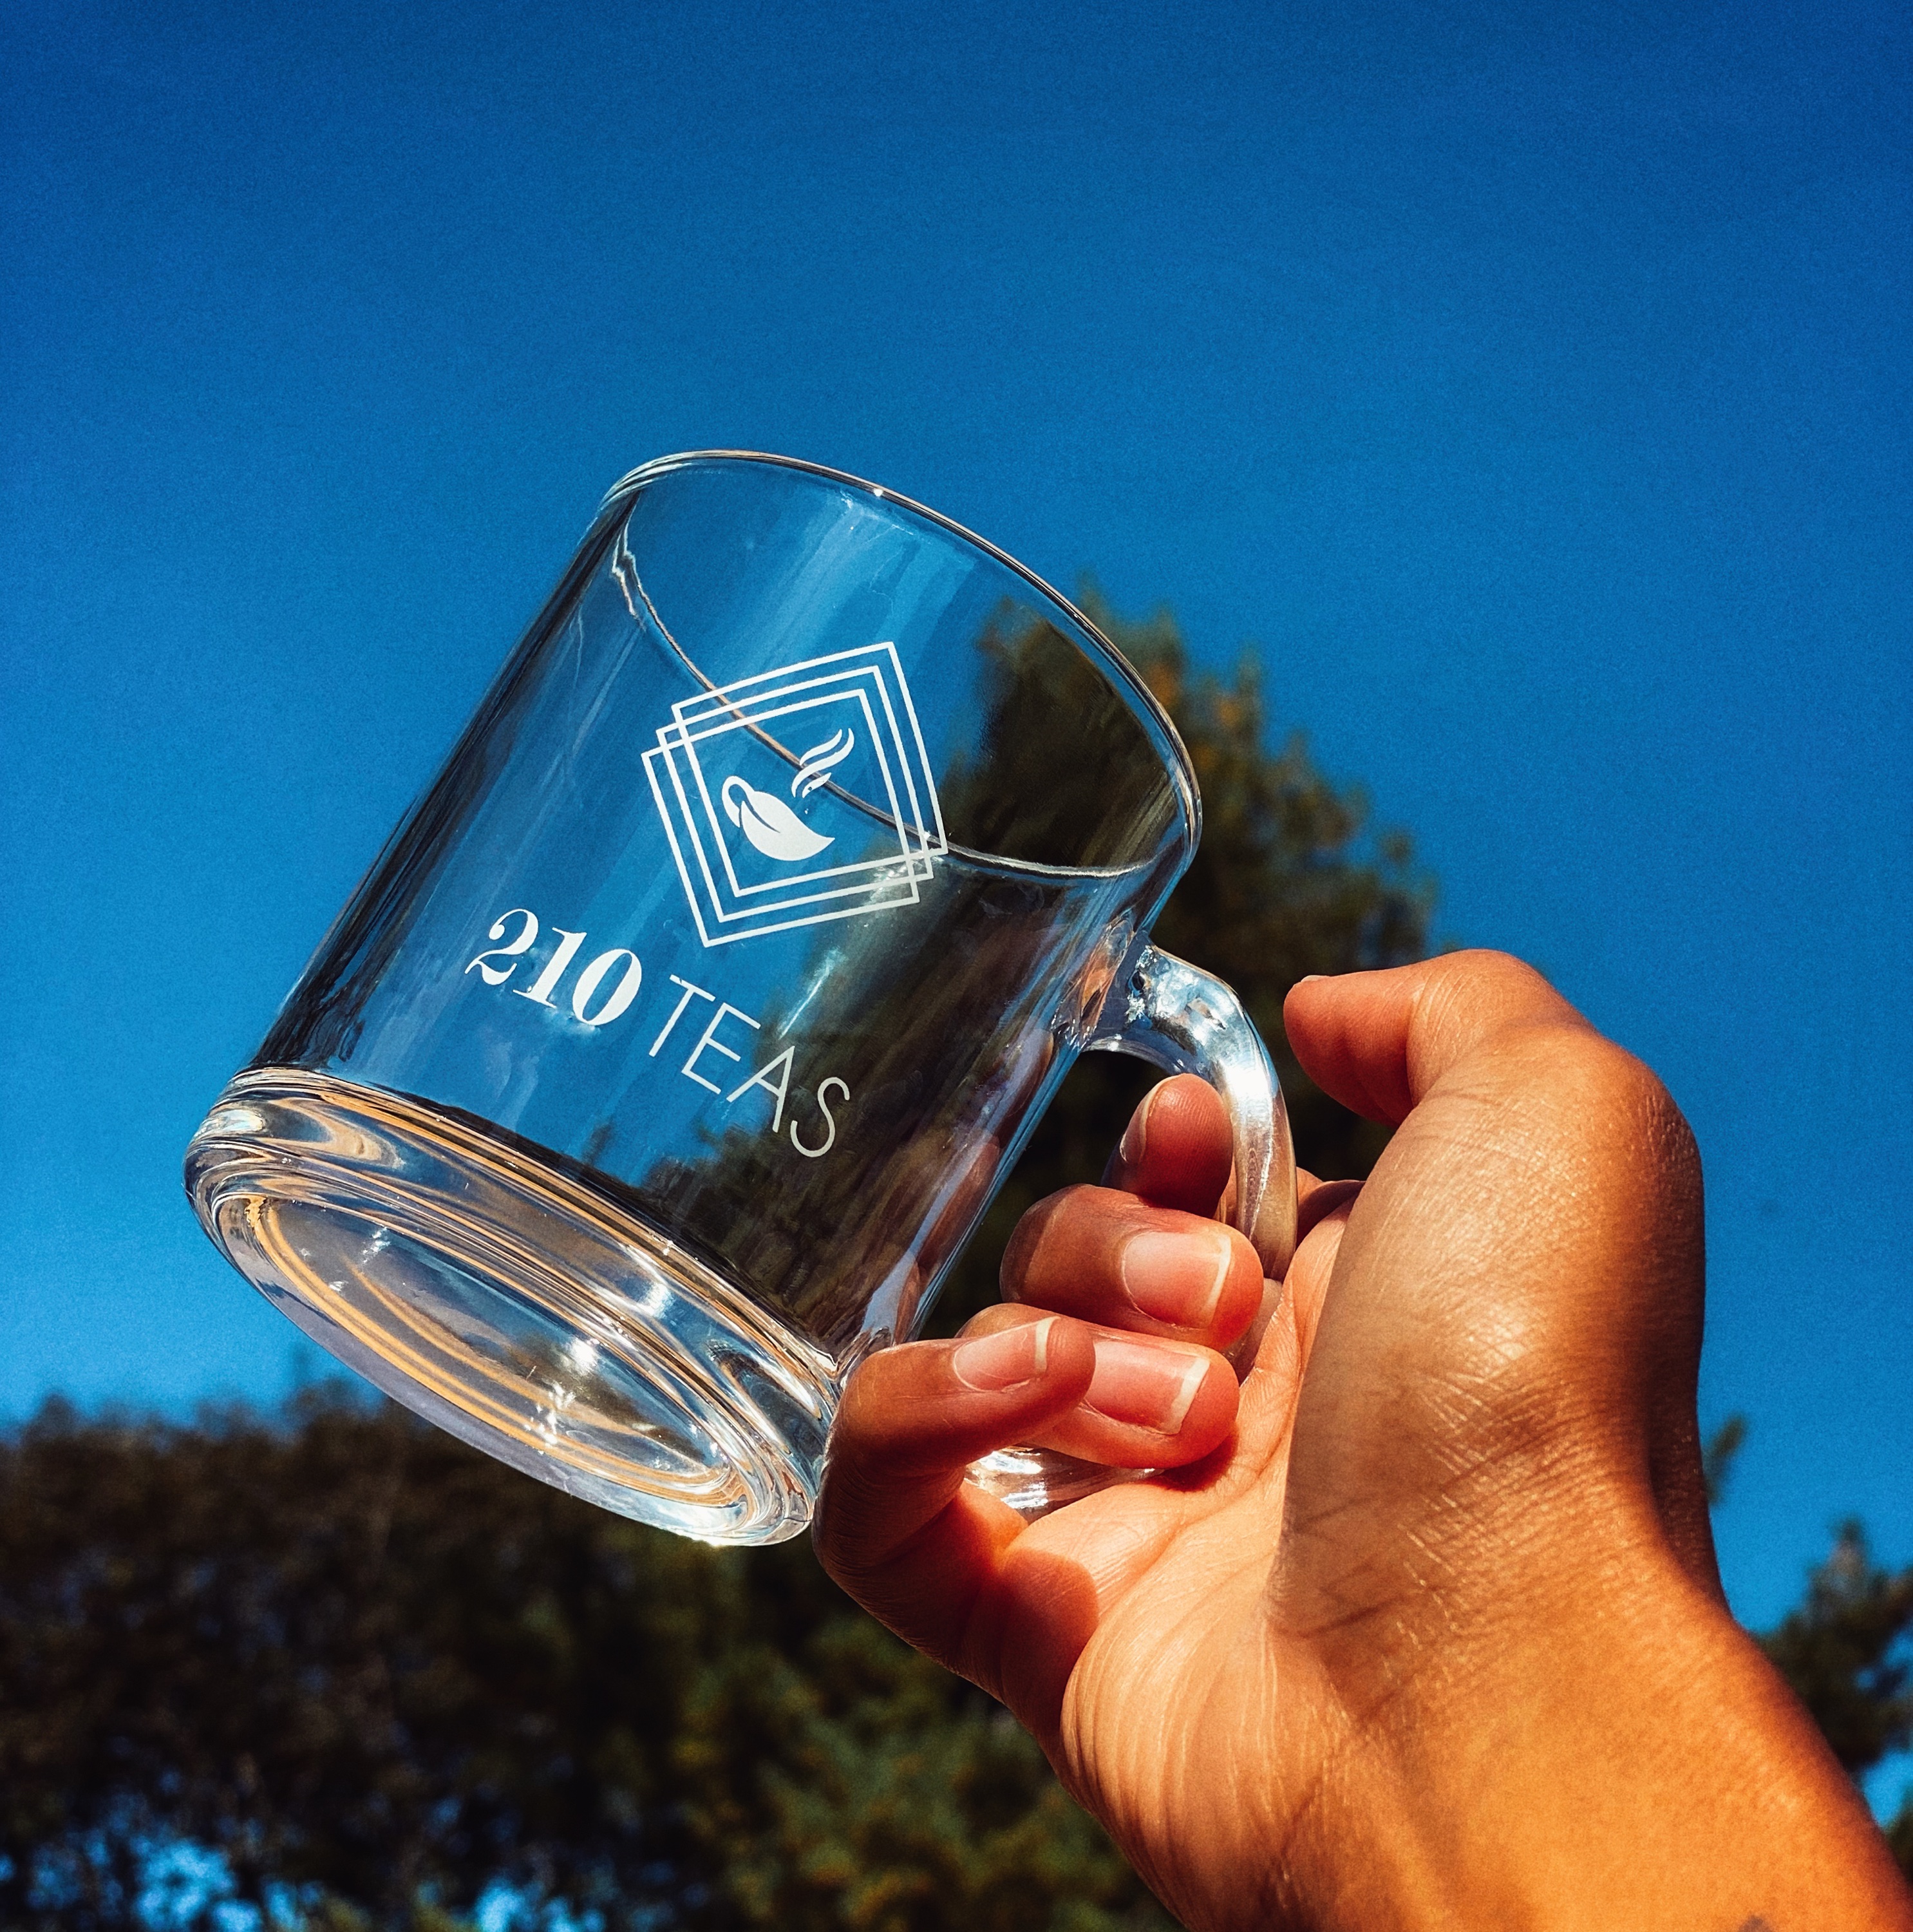 Picture of glass mug being held against blue sky